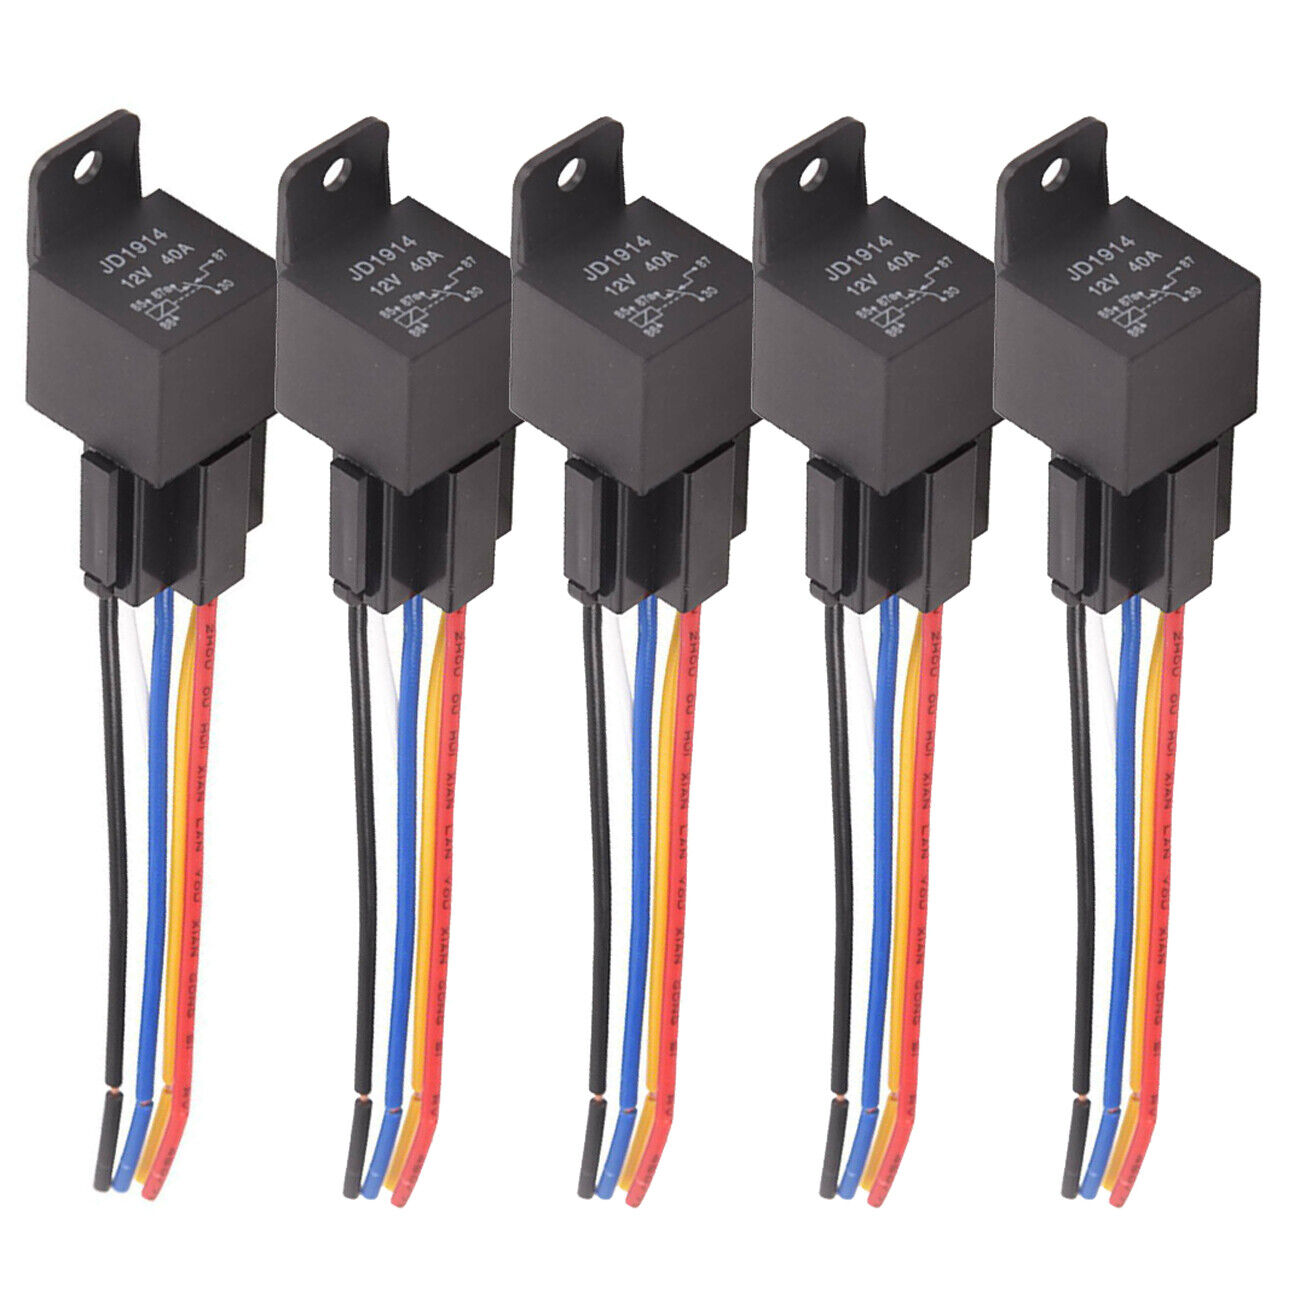 5 Pack 12v 30/40 Amp 5-pin Automotive Relay Set With Wires & Harness Socket